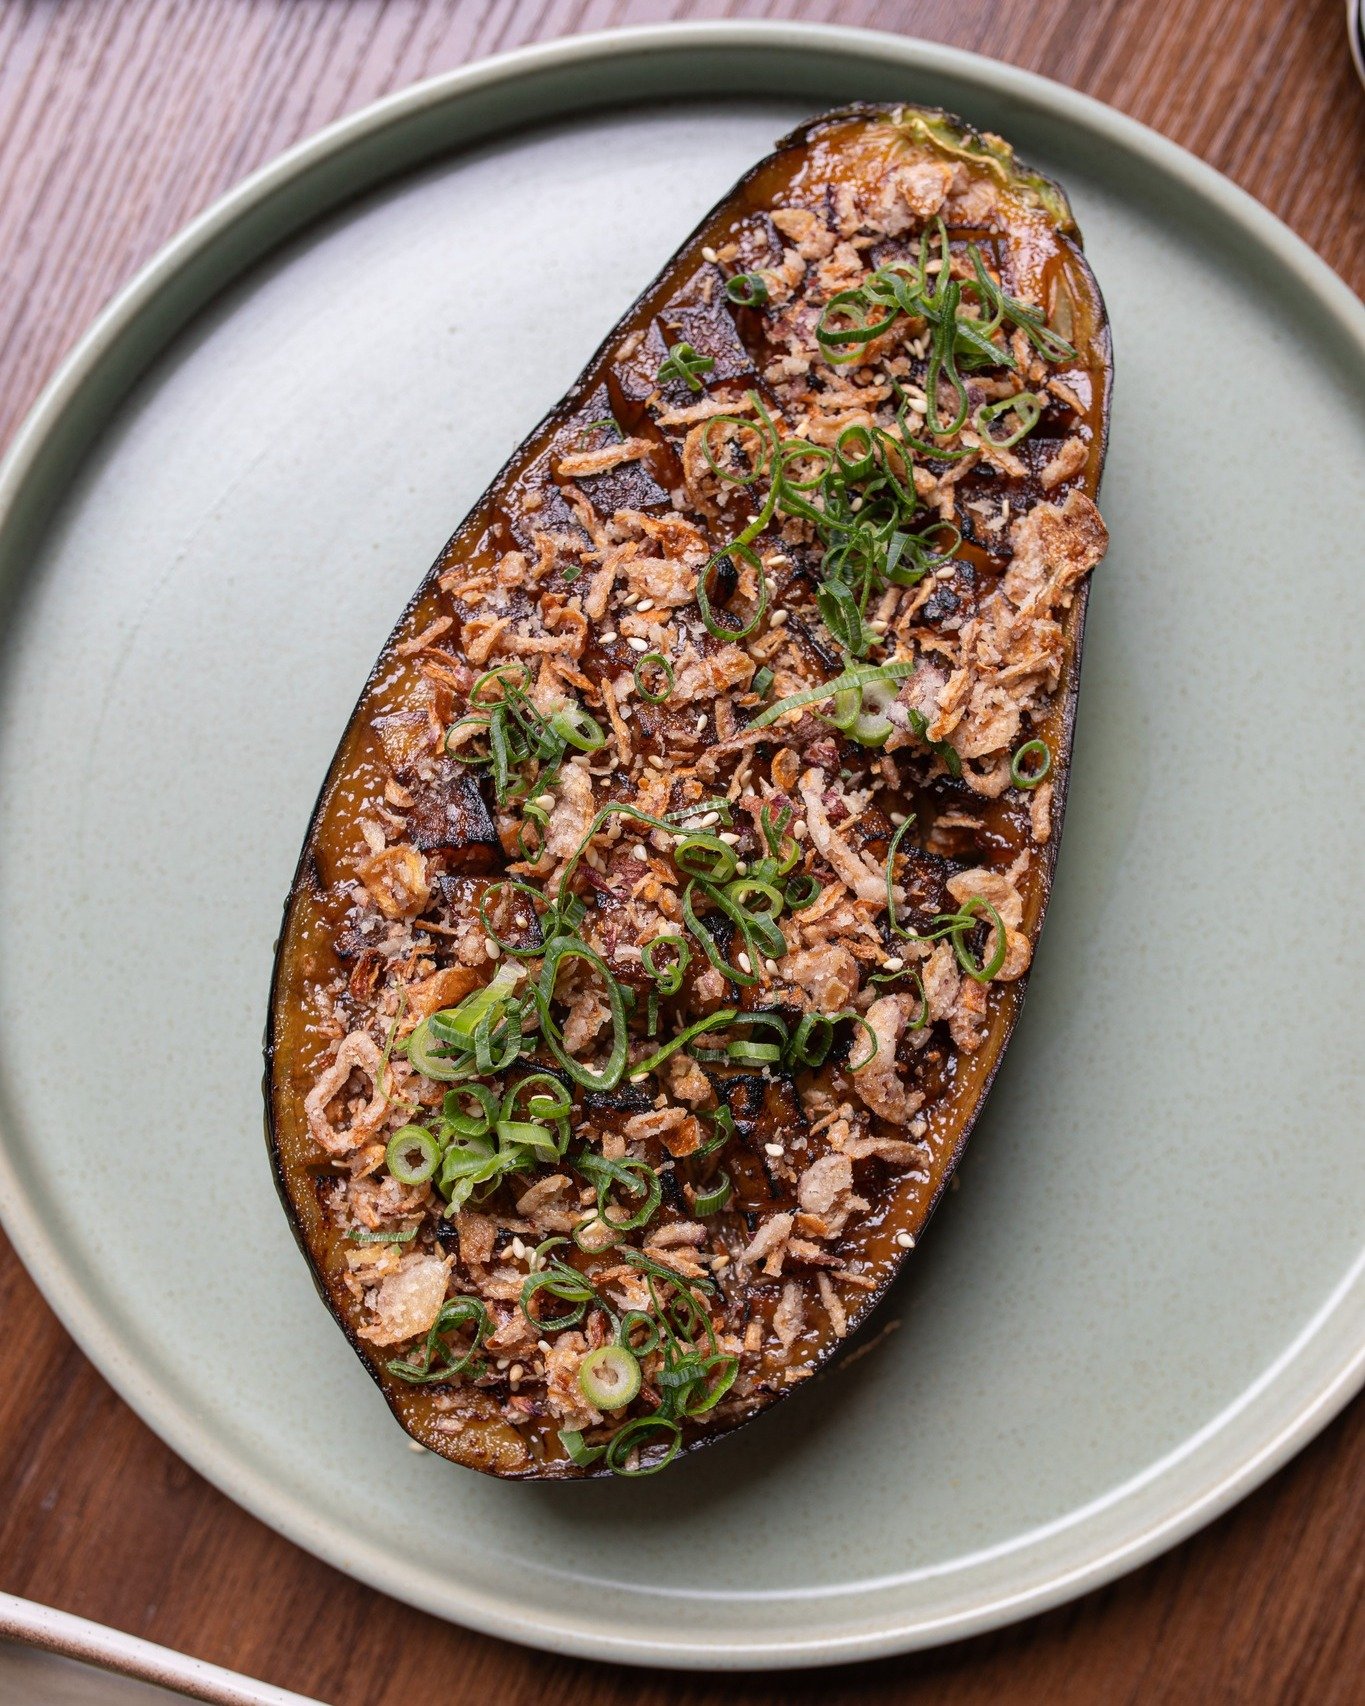 Elevate your eggplant game.

Delight in the smoky aroma and savoury flavours of our Grilled Eggplant, glazed with miso and topped with fragrant onion and shallot. It's a dish that's as delicious as it is satisfying.

#ChopChop #Canberra #Restaurant